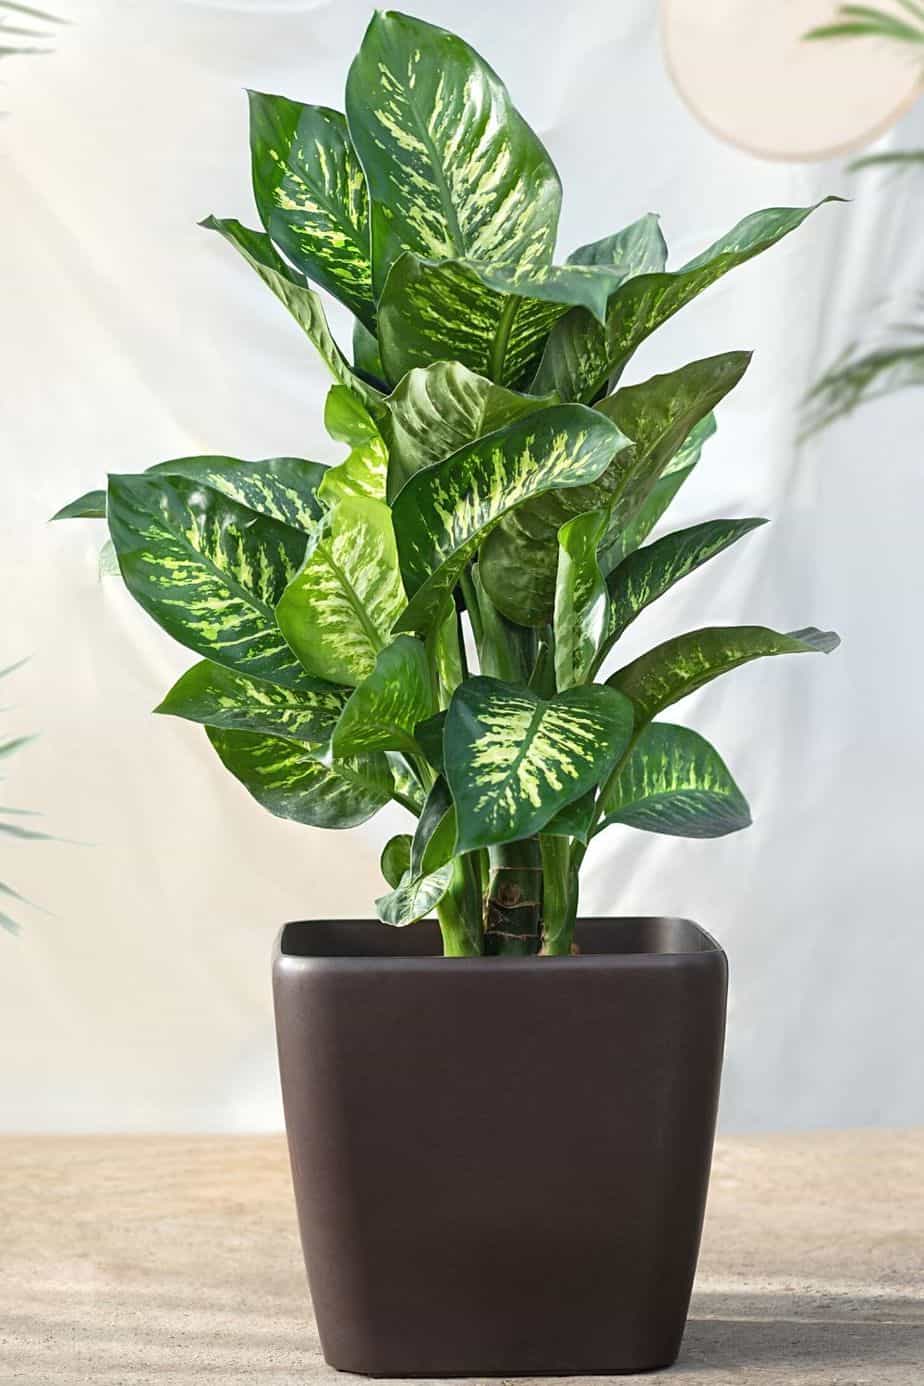 Dieffenbachia, aka Dumb Canes, also contains oxalates that is toxic for cats